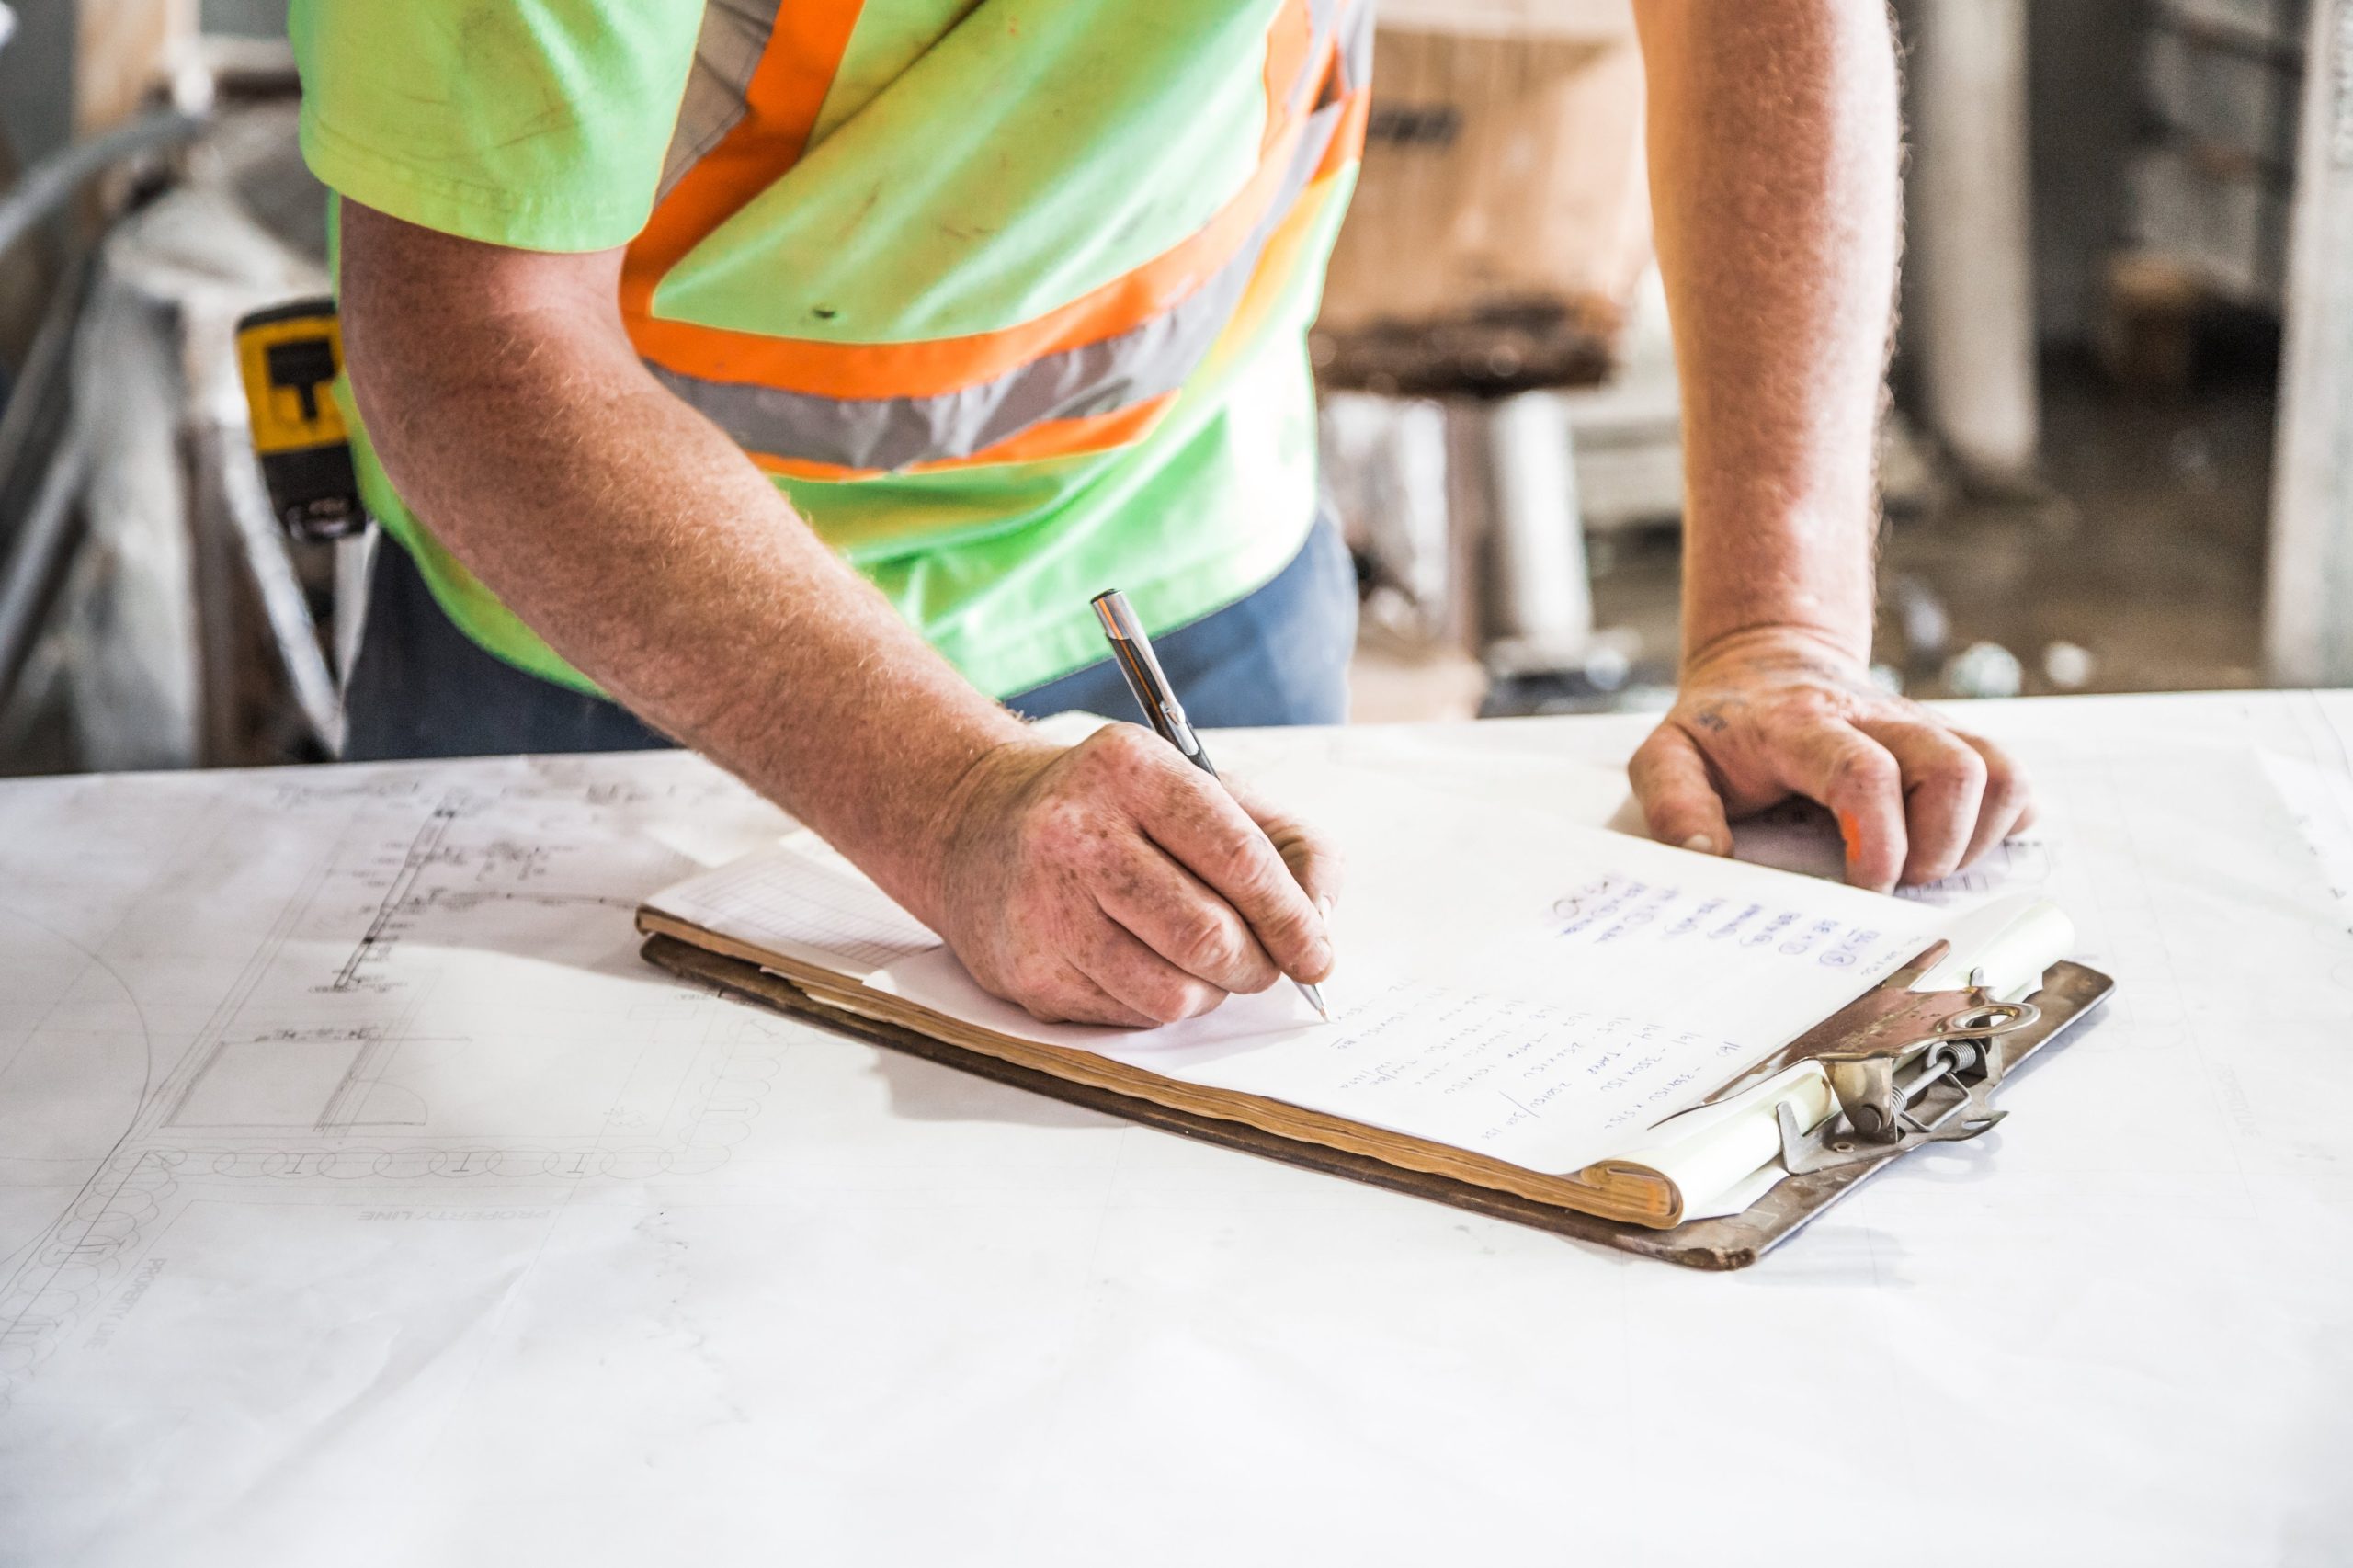 What Is A Health And Safety Audit Checklist?